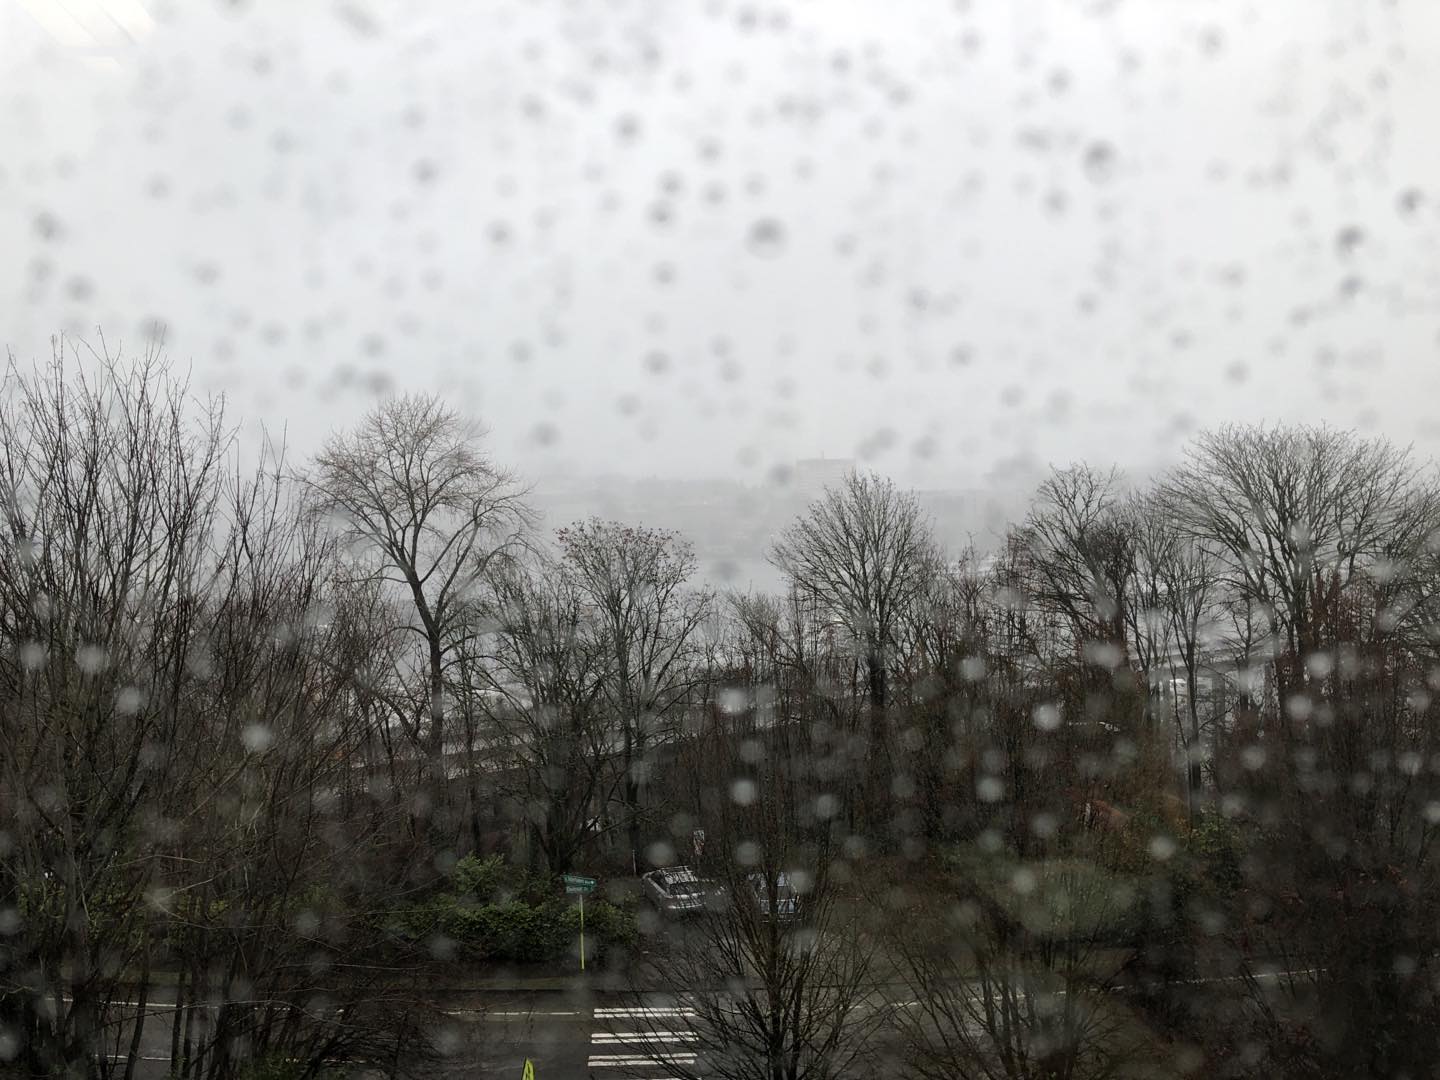 I never get tired of the view from my office
-
-
#seattle #rain #rainyseattle #januaryview #loveseattle #eső #esősnap #január #officeview #myseattlepictures🌿 #winterview #winter #grayday #szürkenap #rainyday #rainydayview #january #télinap #szürkeség